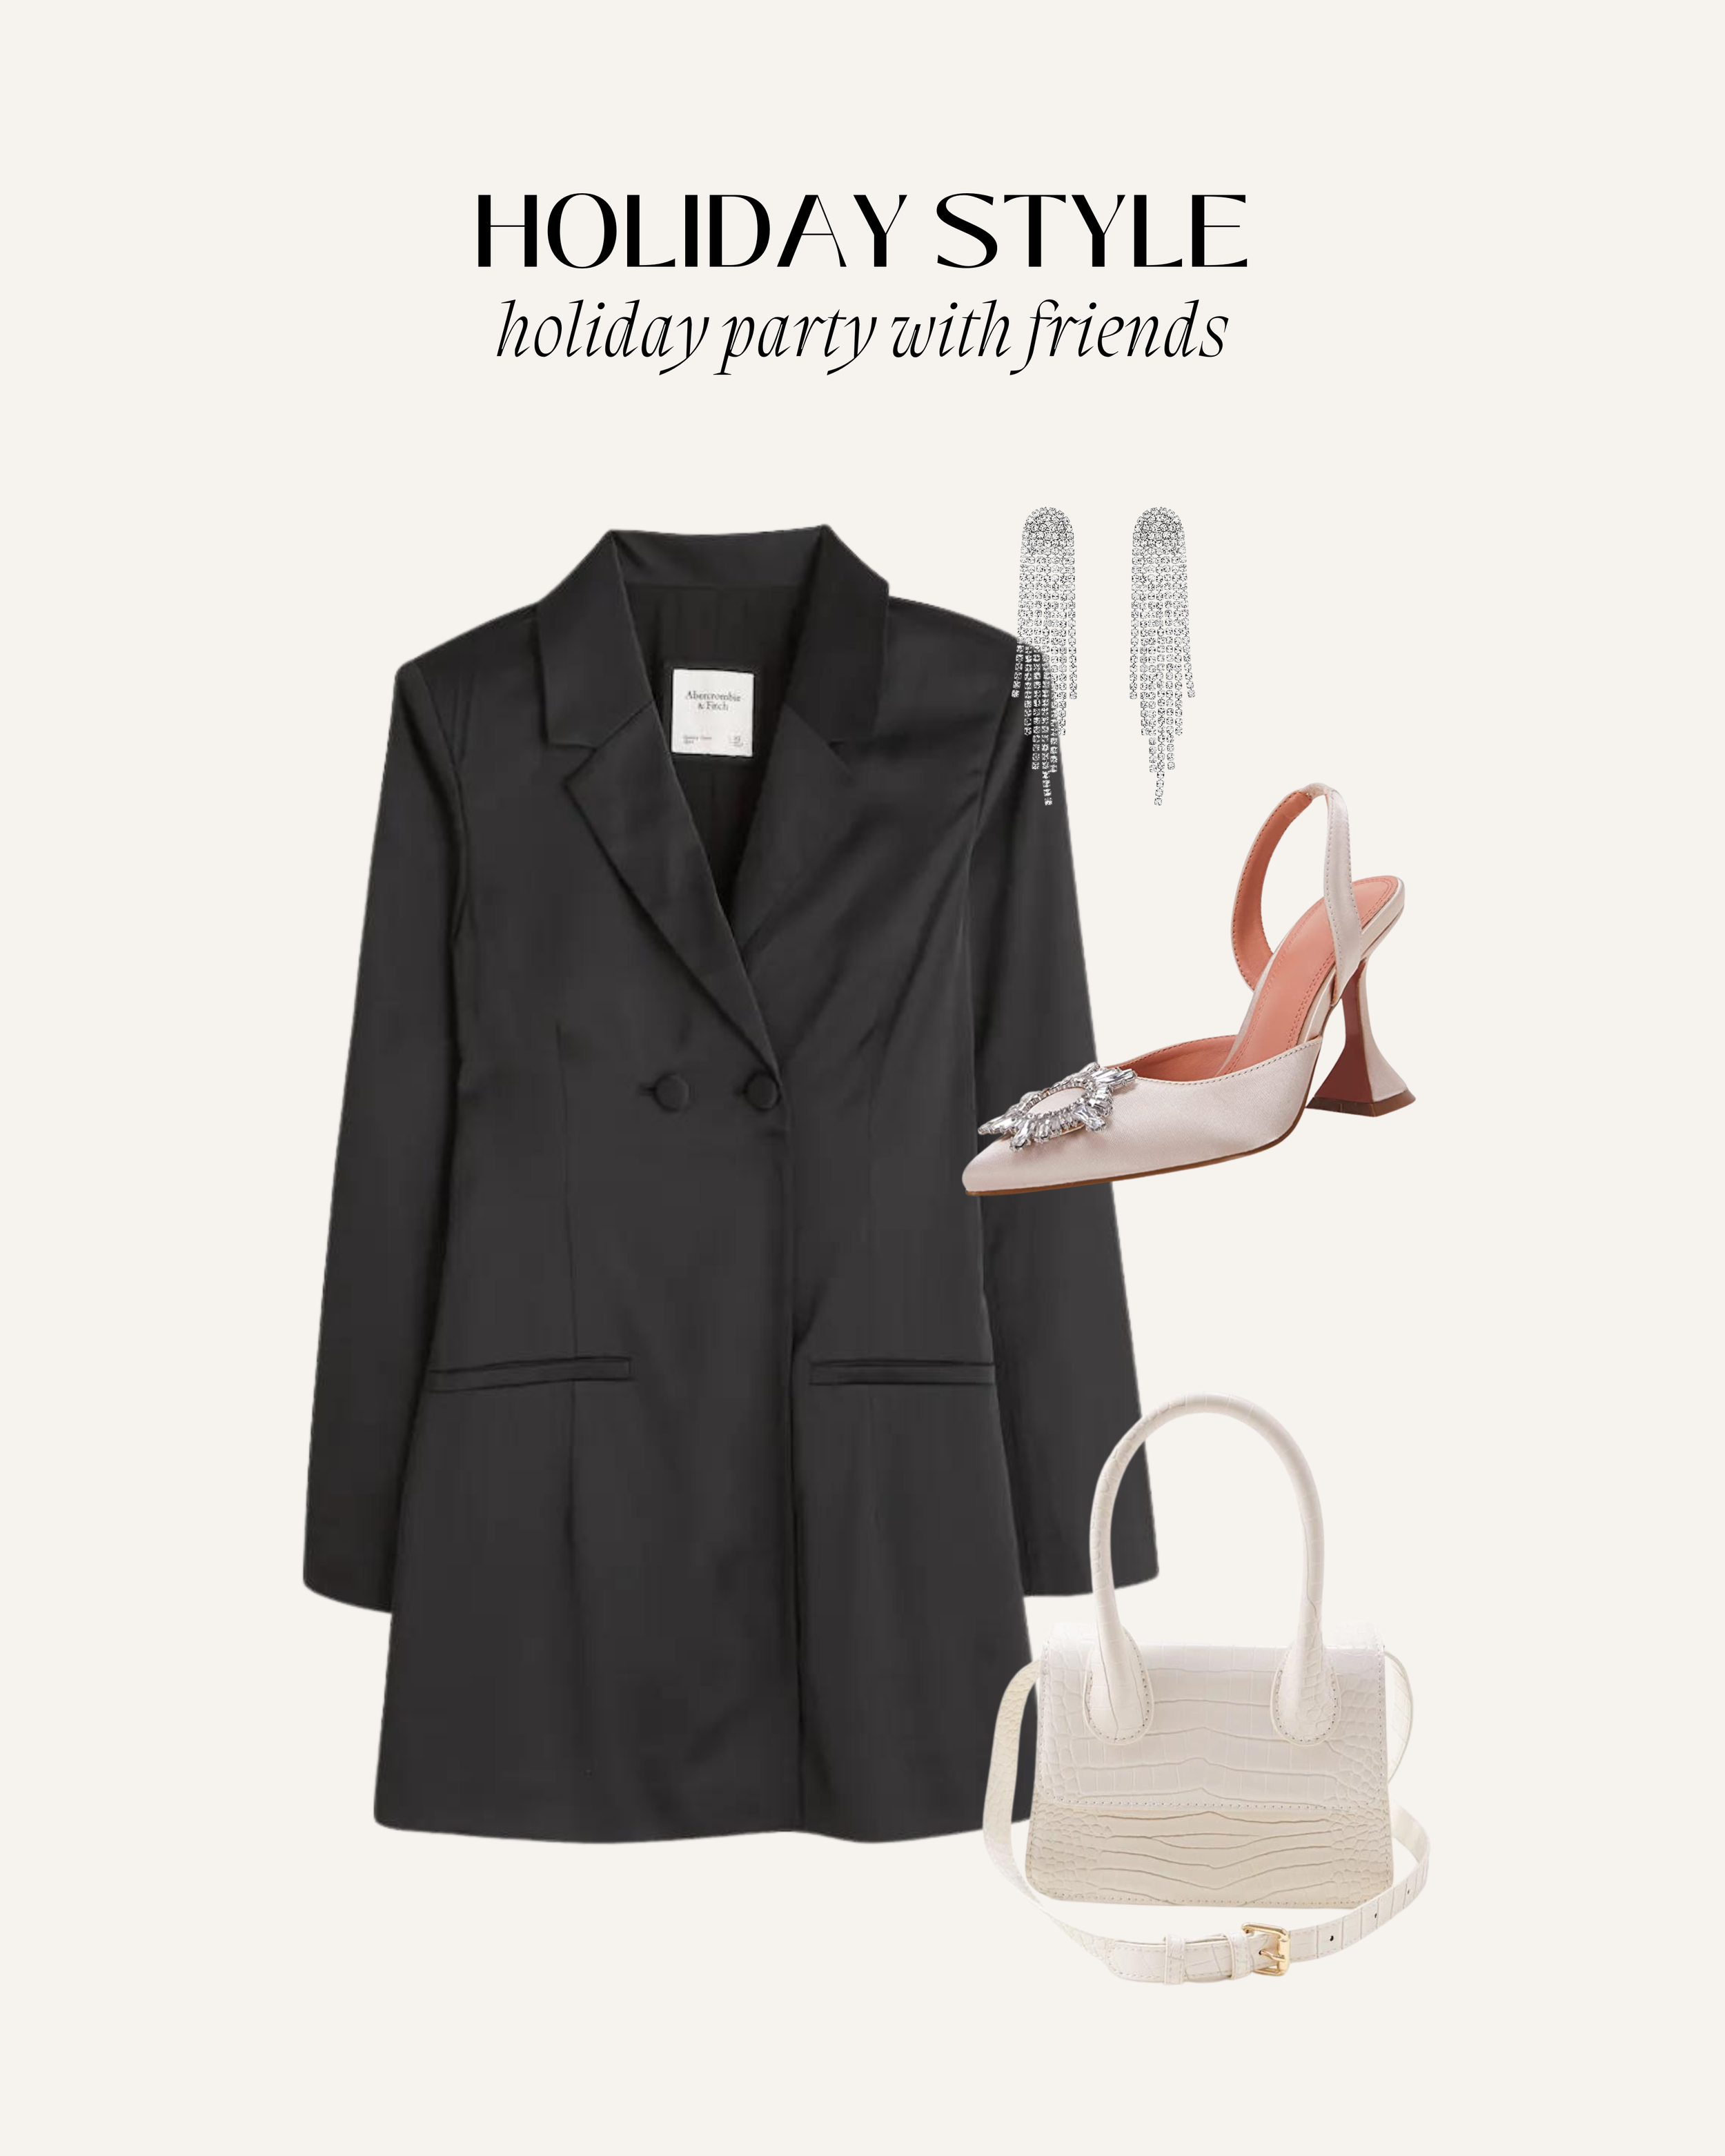 Holiday Style Inspiration - Bre Sheppard - Holiday Party With Friends.png